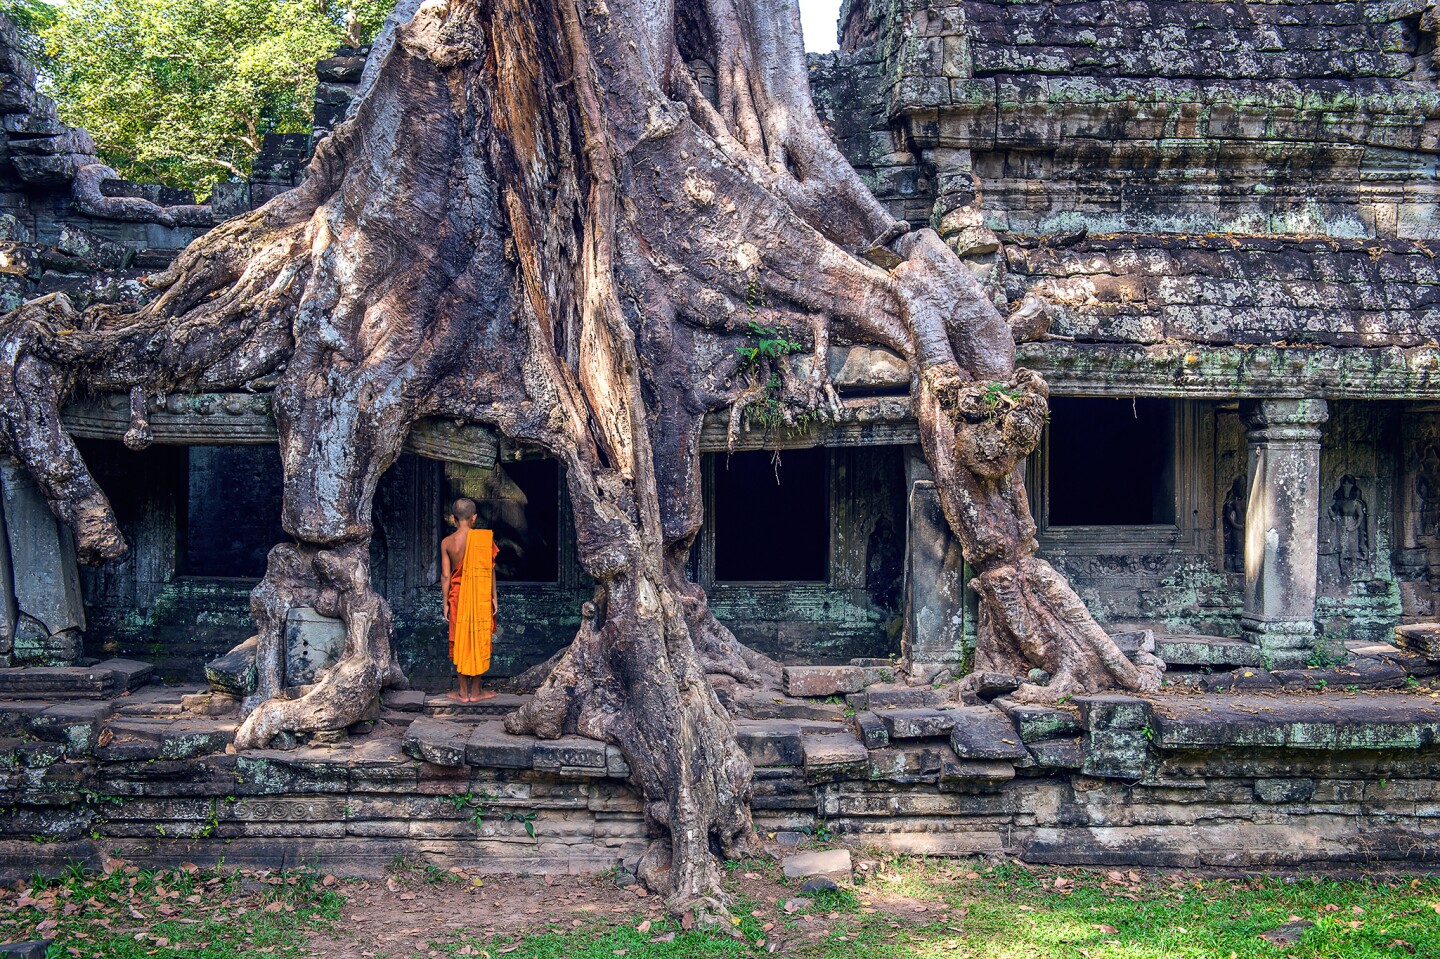 <h2>5. Angkor Wat</h2> <p><i>Siem Reap, Cambodia</i></p> <p> With its wide moat and drip sand castle-like towers, Angkor Wat is one of the most scenic World Heritage sites and recognizable religious structures. King Suryavarman II, ruler of Southeast Asia’s former Khmer Empire, directed the construction during the 12th century. The Hindu temple complex, a network of stone temples decorated with intricate carvings of <i>devatas</i> (Hindu deities), is even more impressive when you consider it’s just one of the attractions at the UNESCO-designated <a class="Link" href="https://whc.unesco.org/en/list/668" rel="noopener">Angkor Archaeological Park</a>. Spread across approximately 400 acres in northwestern Cambodia, the complex has many other architecturally significant jungle-intertwined ruins and temples, including a temple featured in Angelina Jolie’s 2001<i>Tomb Raider</i> film, as well as inhabited villages. </p>  <h3>How to visit</h3> <p> The park entrance is approximately three miles north of the center of Siem Reap. A convenient way to visit Angkor Wat is to hire a tuk-tuk driver for about $20 a day. Visitors can buy tickets at the main entrance to the temple. One-day passes cost approximately $37 for adults; entry for children 12 and under is free.</p> <p>There are many affordable hotels in Siem Reap, but book a safari-style tent at <a class="Link" href="https://the-beige.com/" rel="noopener">The Beige</a> (where even the floating forest pool has views of the World Heritage site) for a slight splurge. </p>